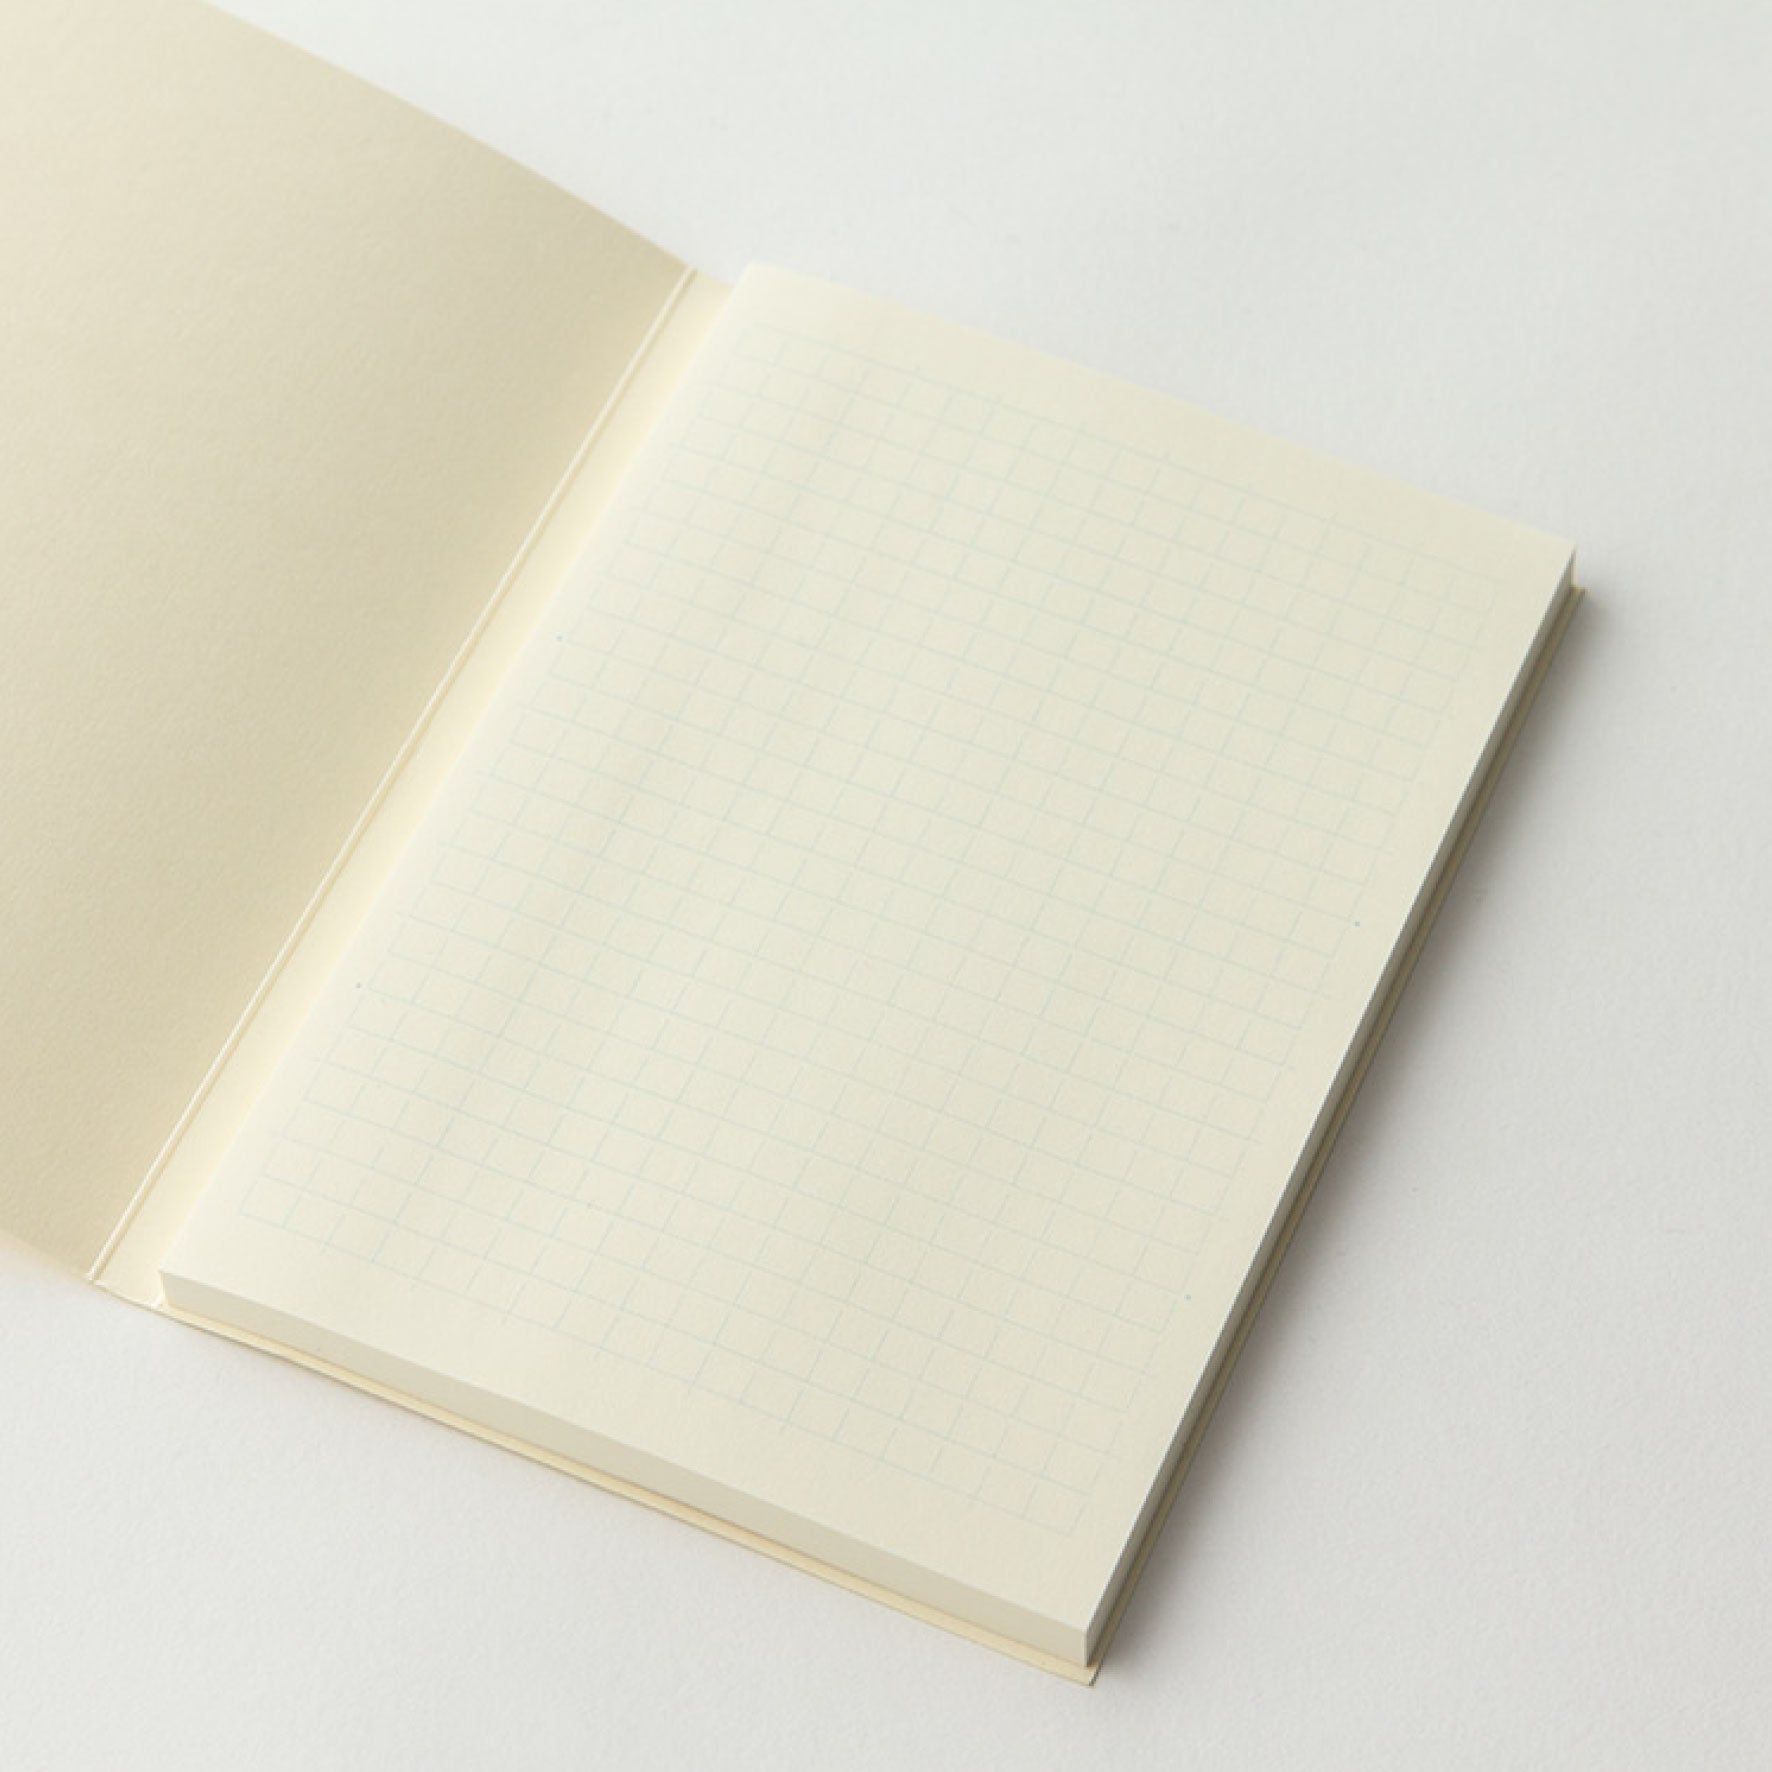 Midori - Notepad - Sticky - A6 - Grid <Outgoing>